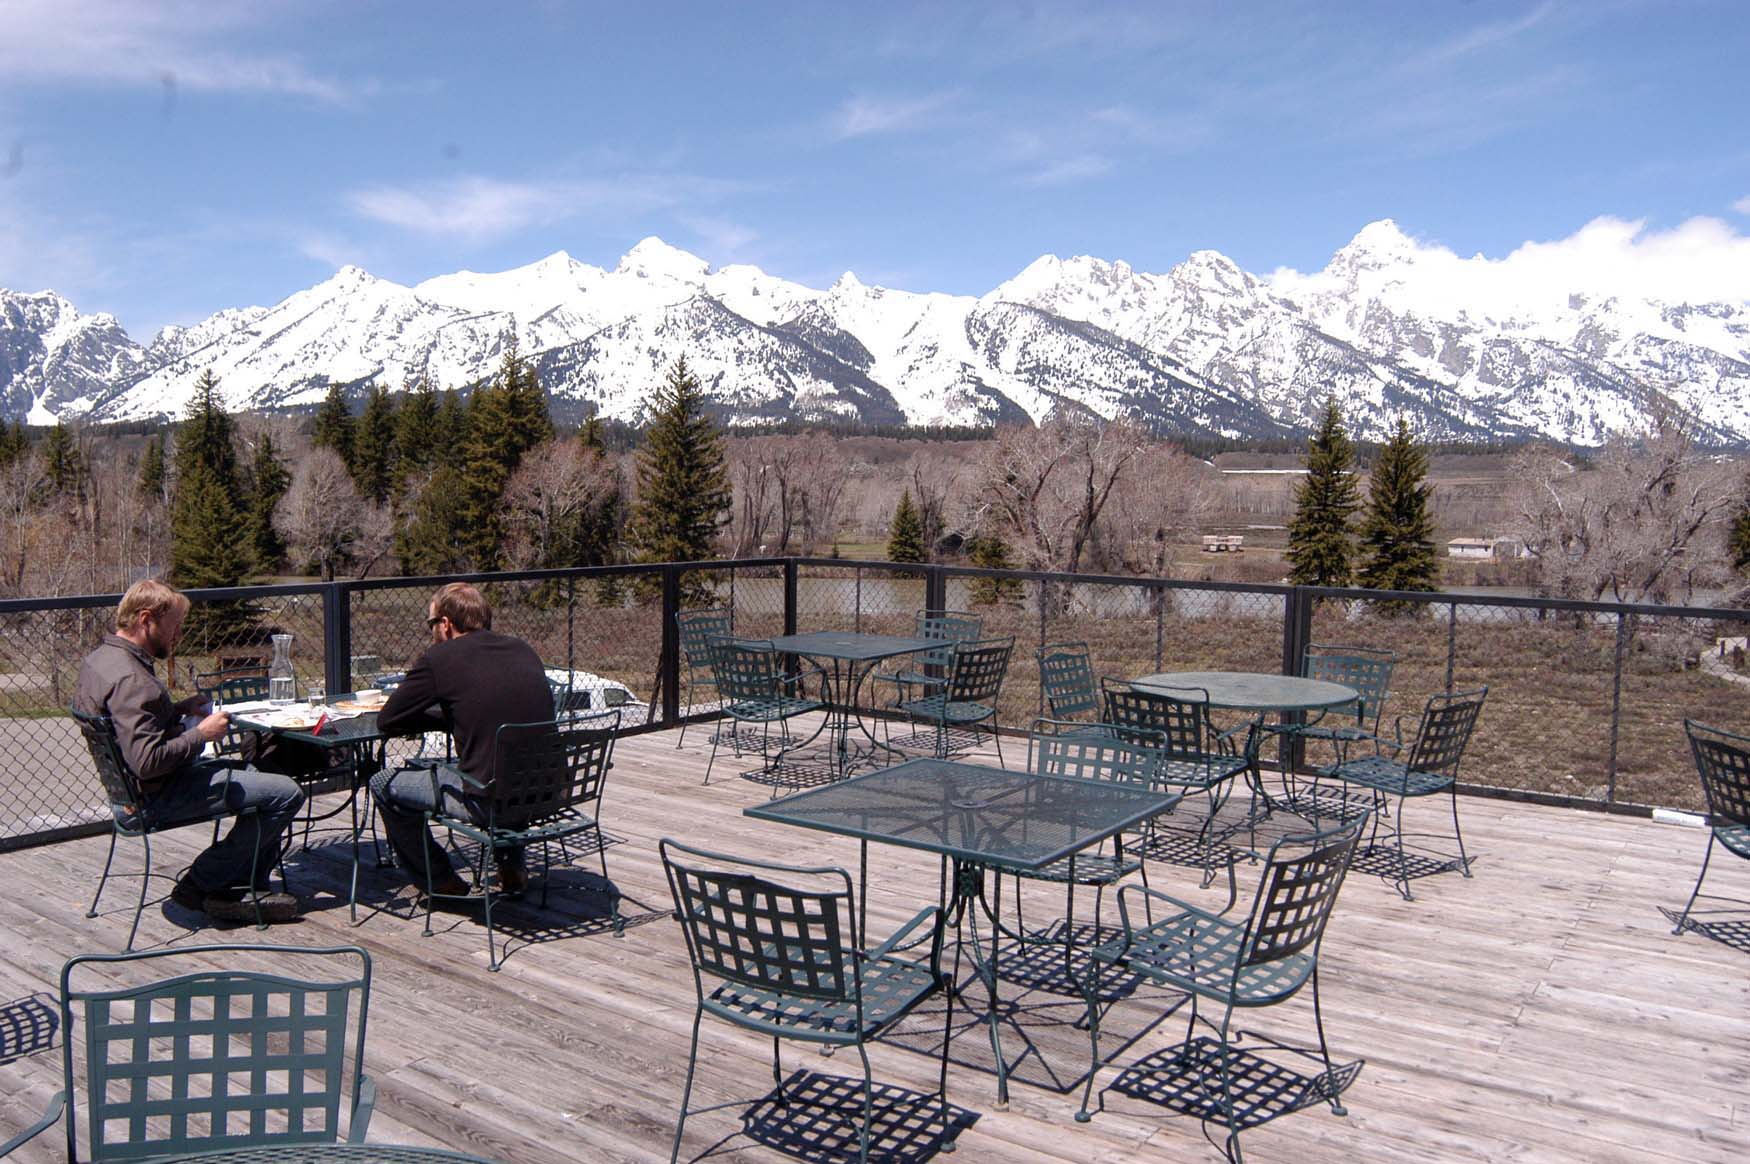 Jason Lesli, left, and Duane Nardi have lunch on the rooftop deck of Dornan's restaurant in May 2011 in Grand Teton National Park. (Ruffin Prevost/Yellowstone Gate)